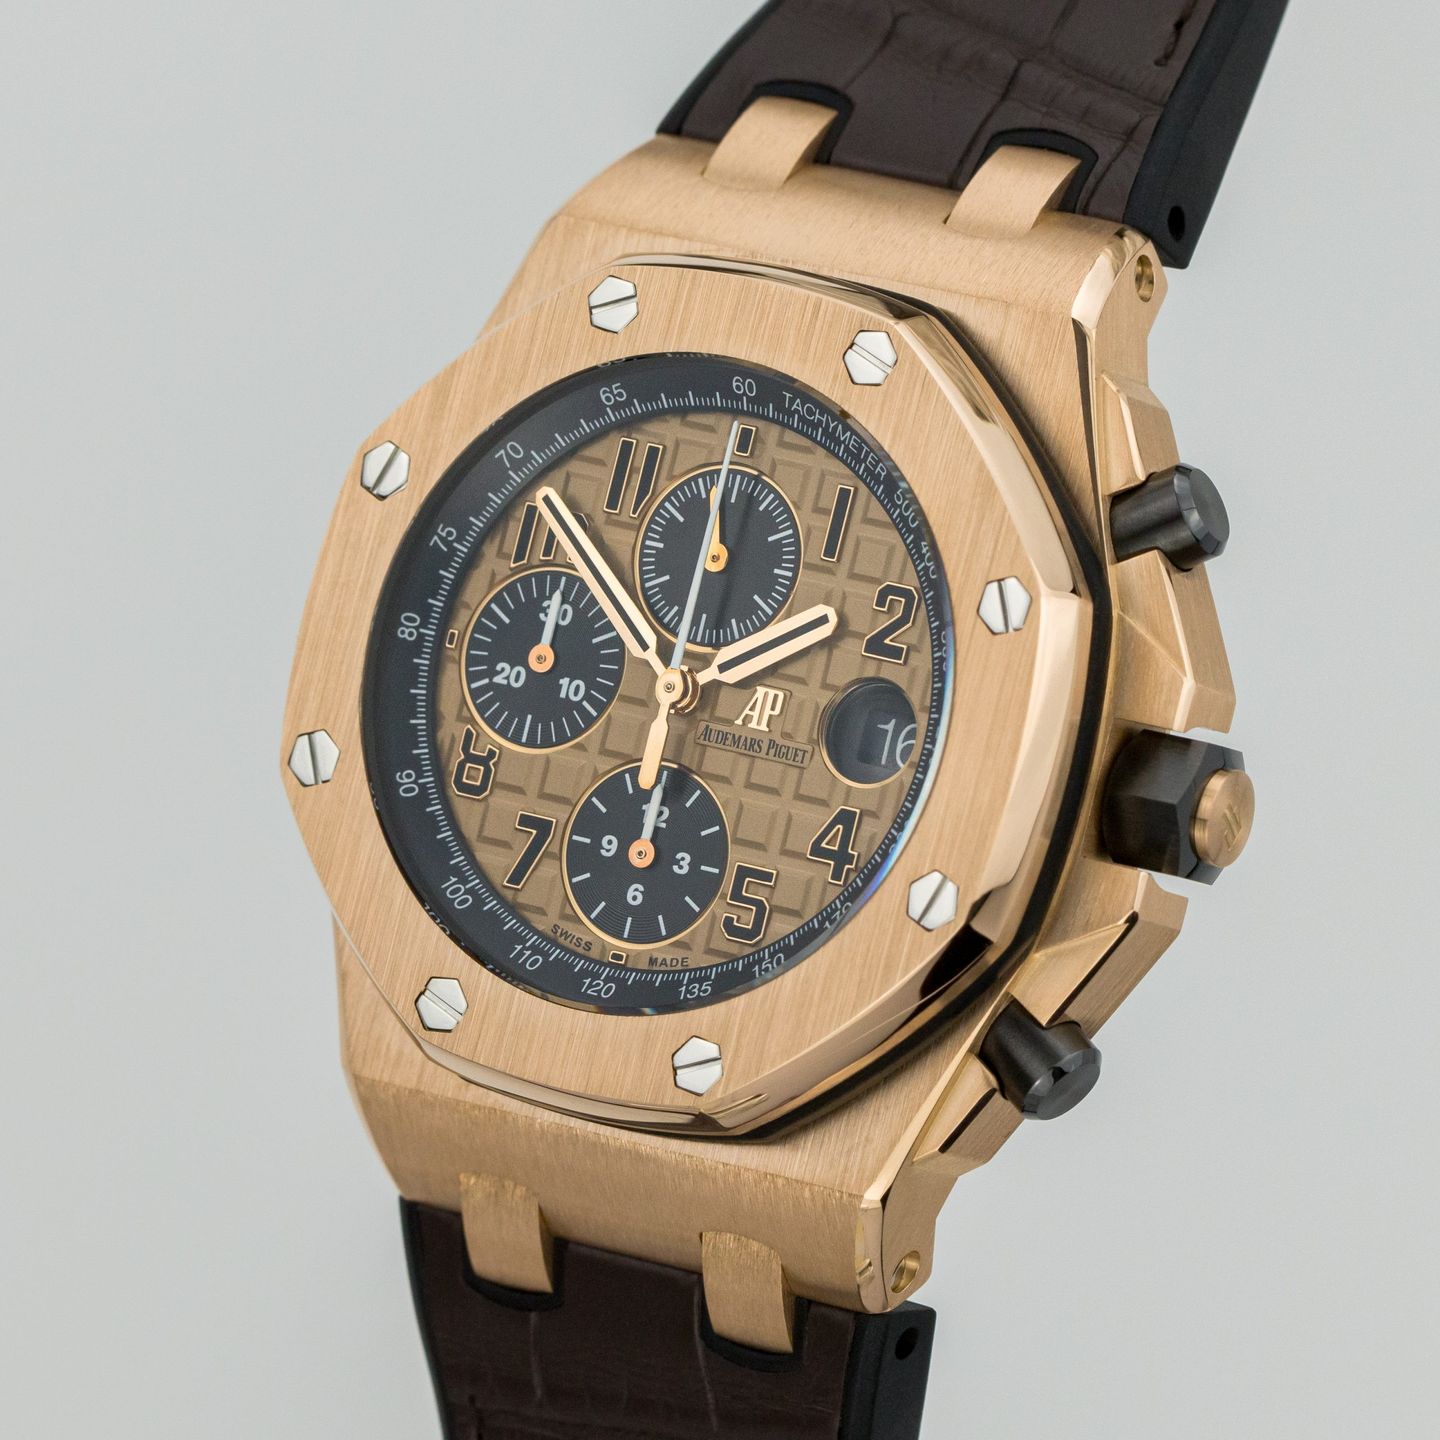 Audemars Piguet Royal Oak Offshore Chronograph 26470OR.OO.A002CR.01 (Unknown (random serial)) - Gold dial 42 mm Rose Gold case (1/7)